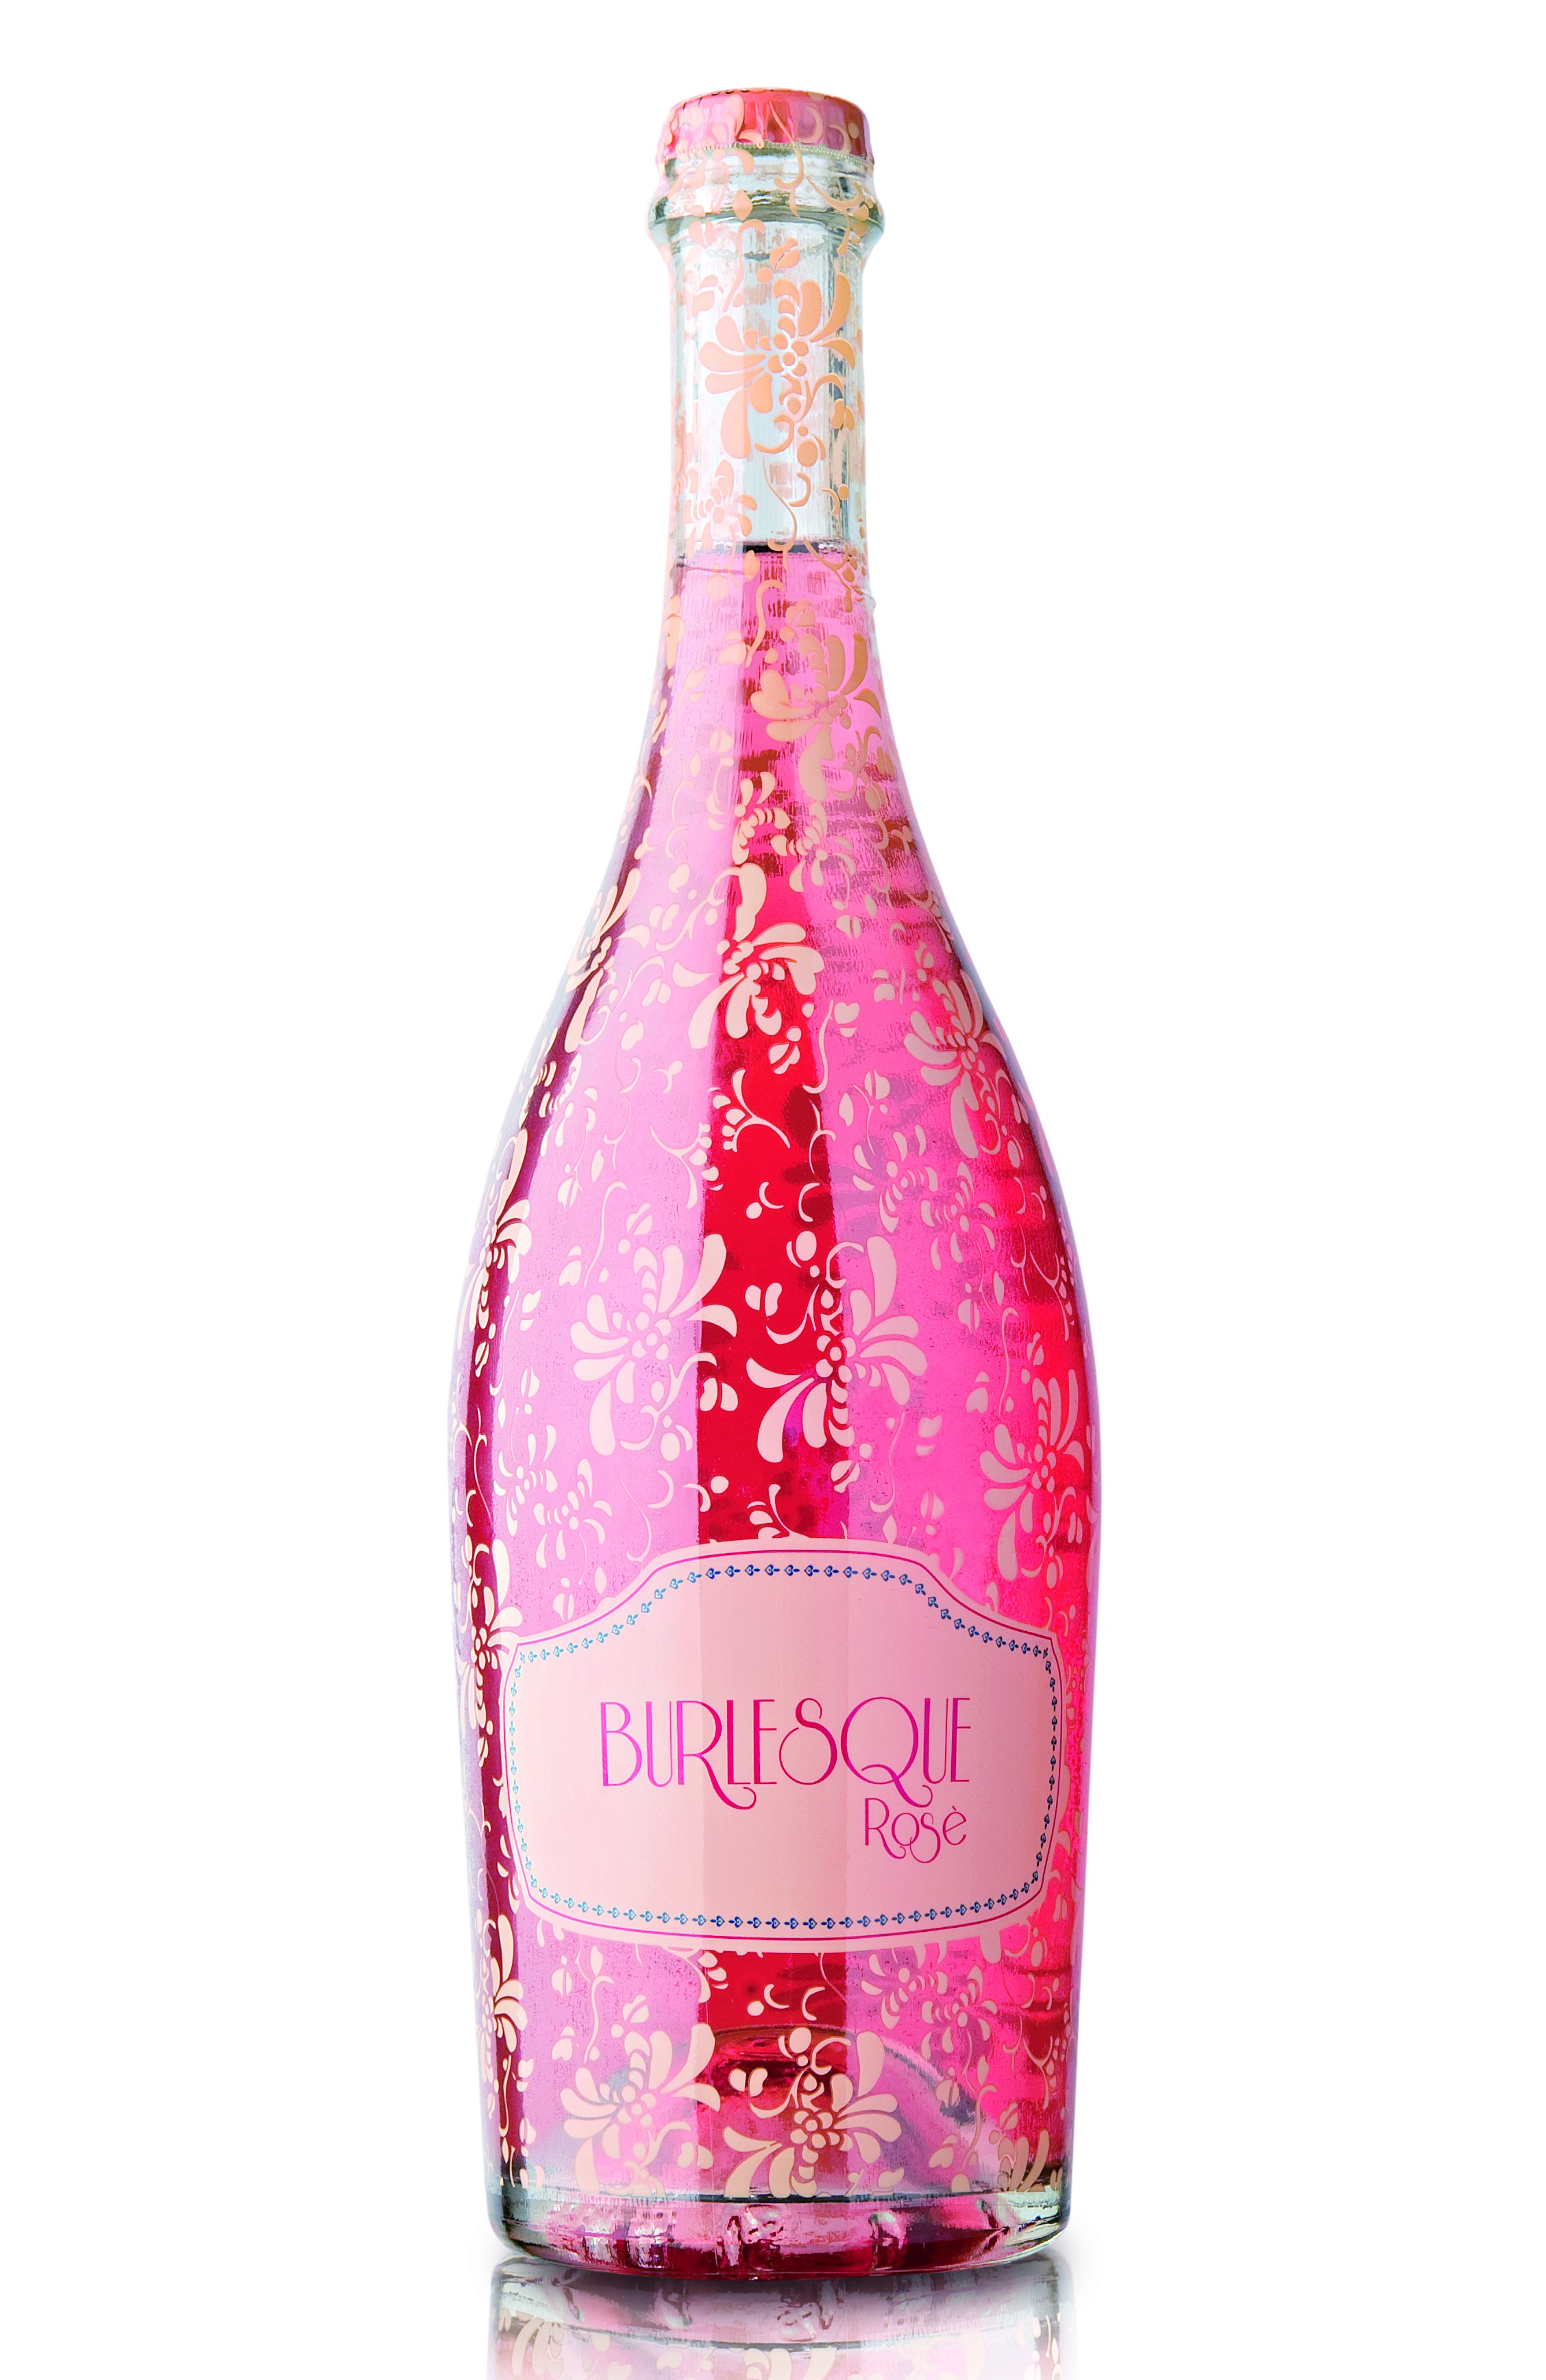 ateriet burlesque rosé really tickled thedieline sualize